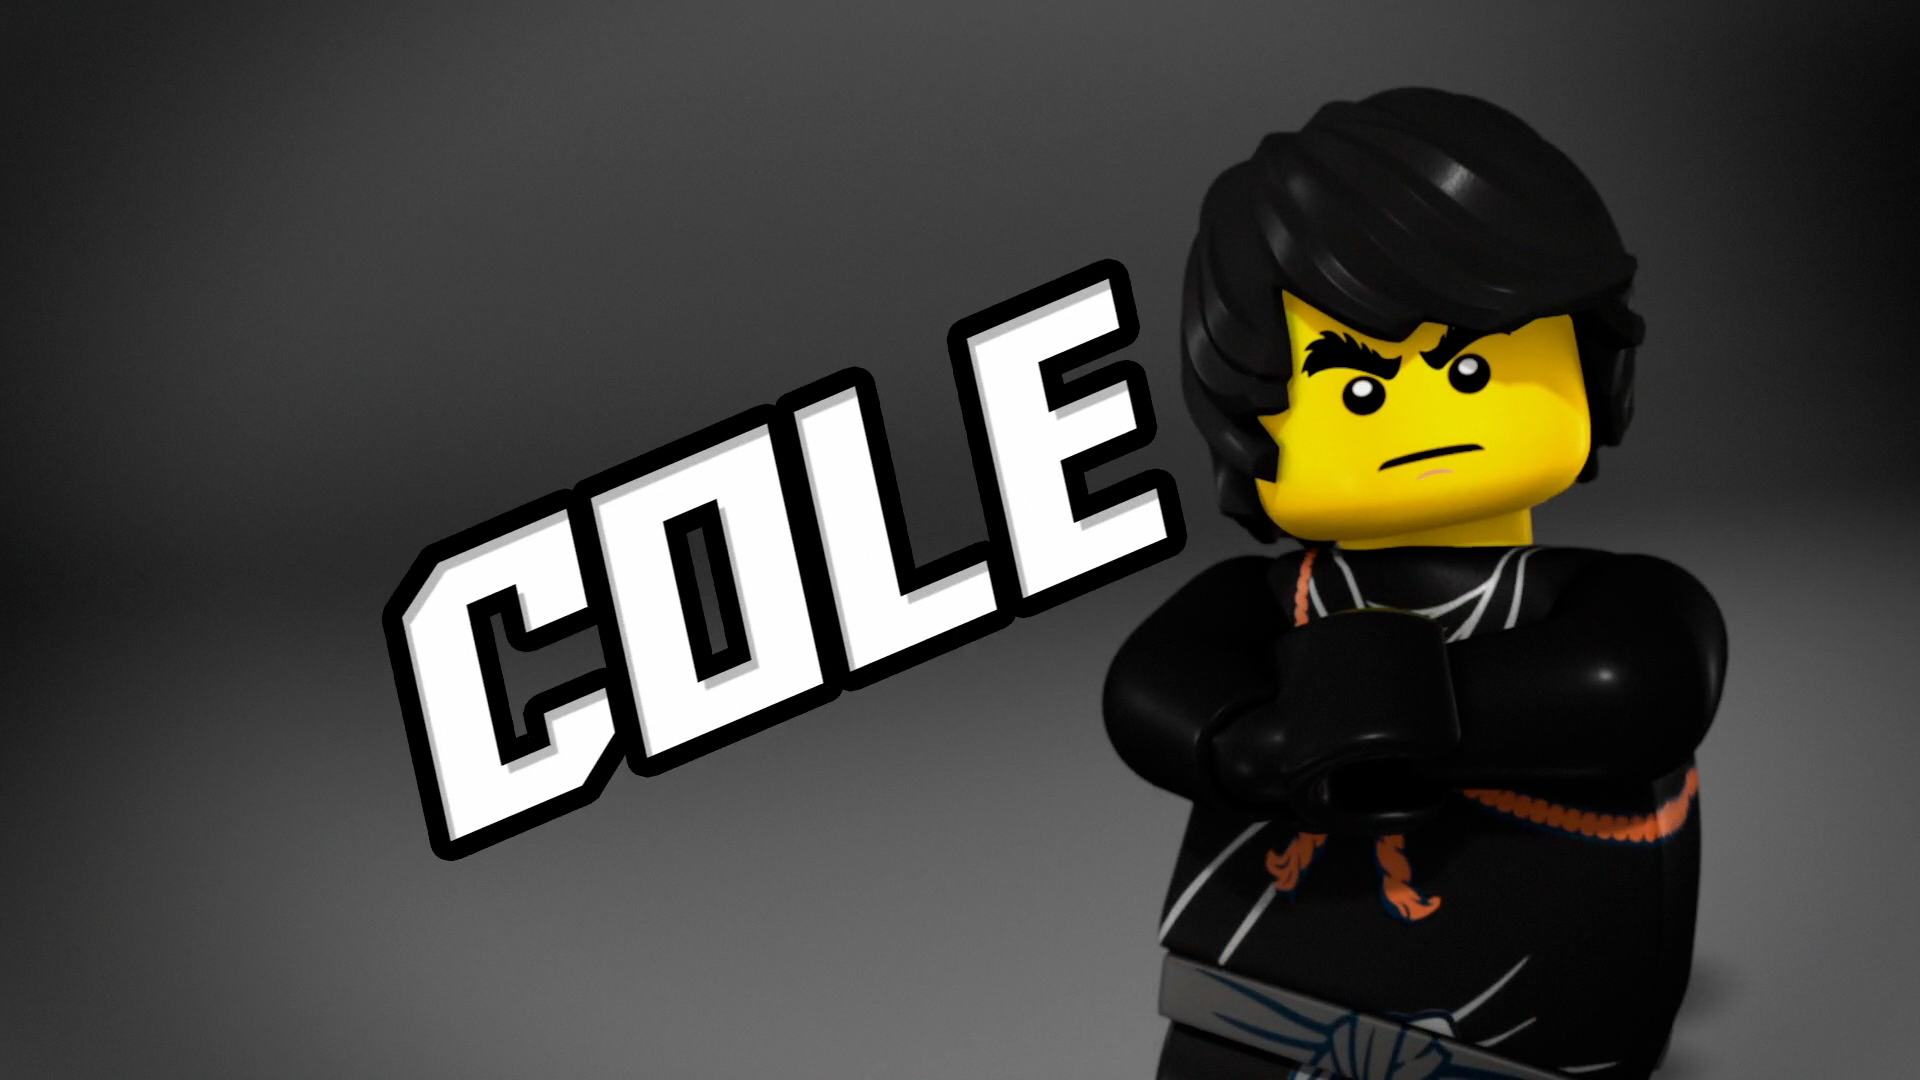 History of Cole (Rise of the Serpentine) | Ninjago Wiki | FANDOM powered by Wikia